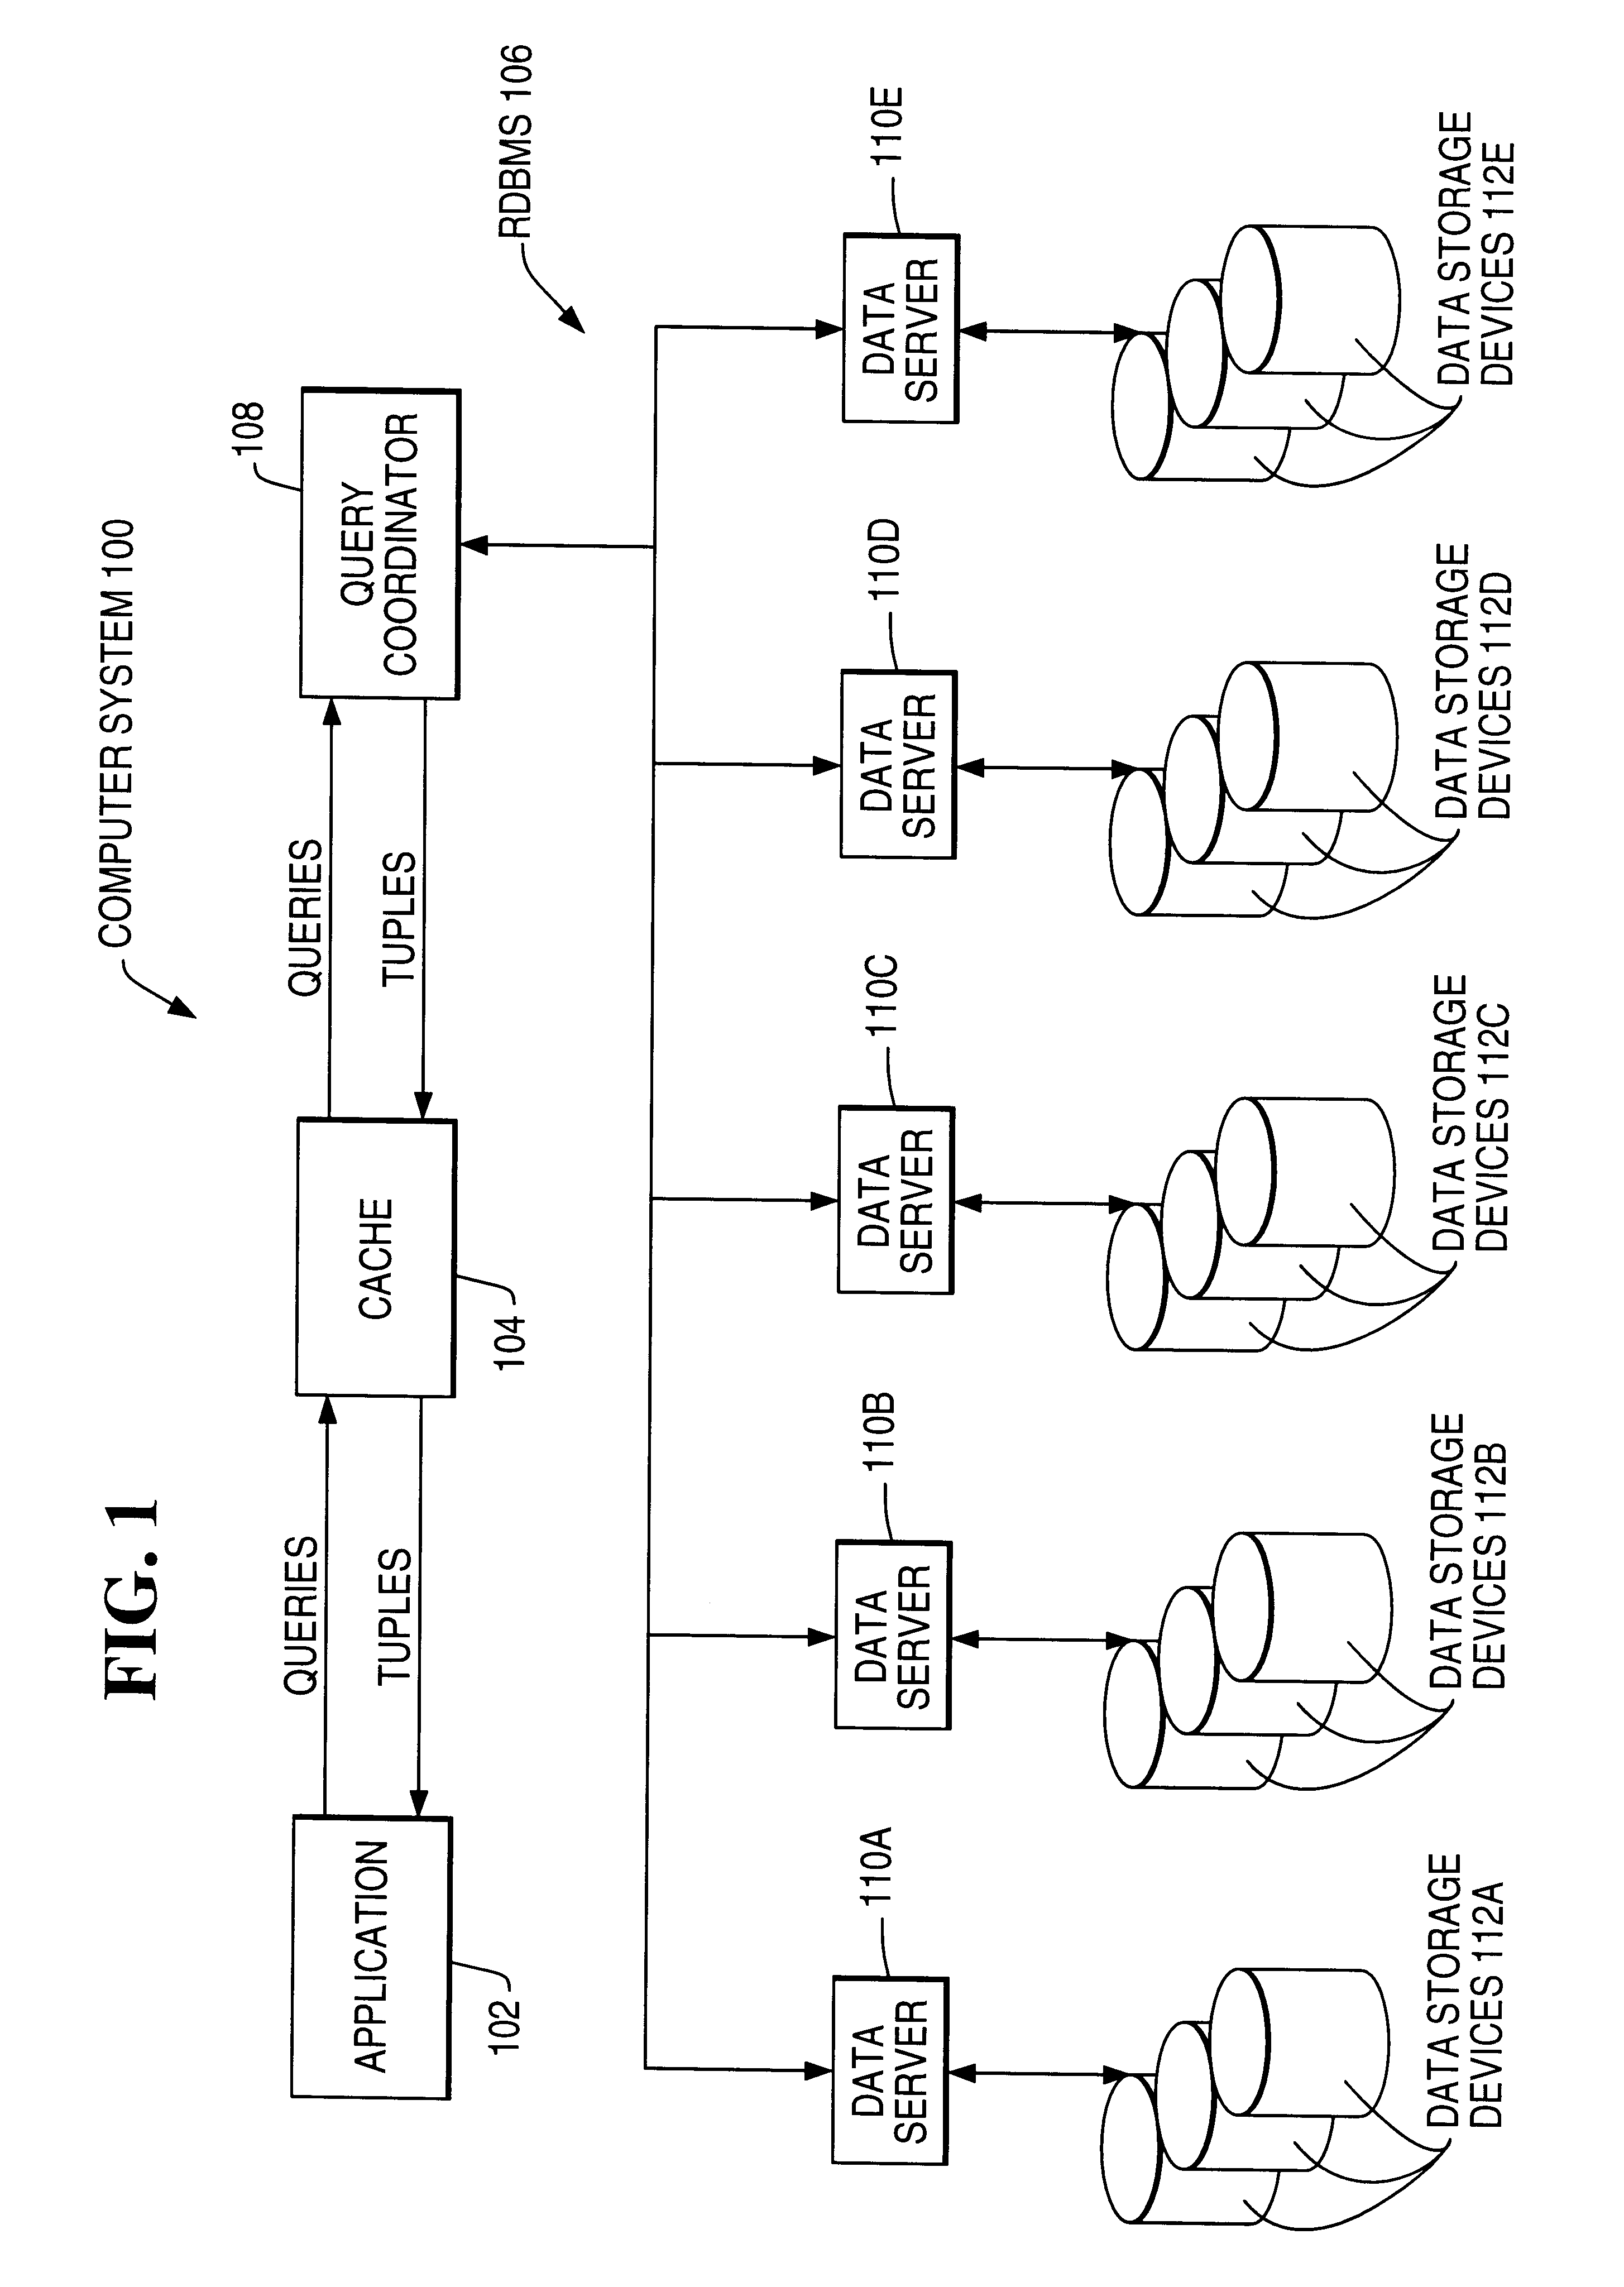 Active caching for multi-dimensional data sets in relational database management system